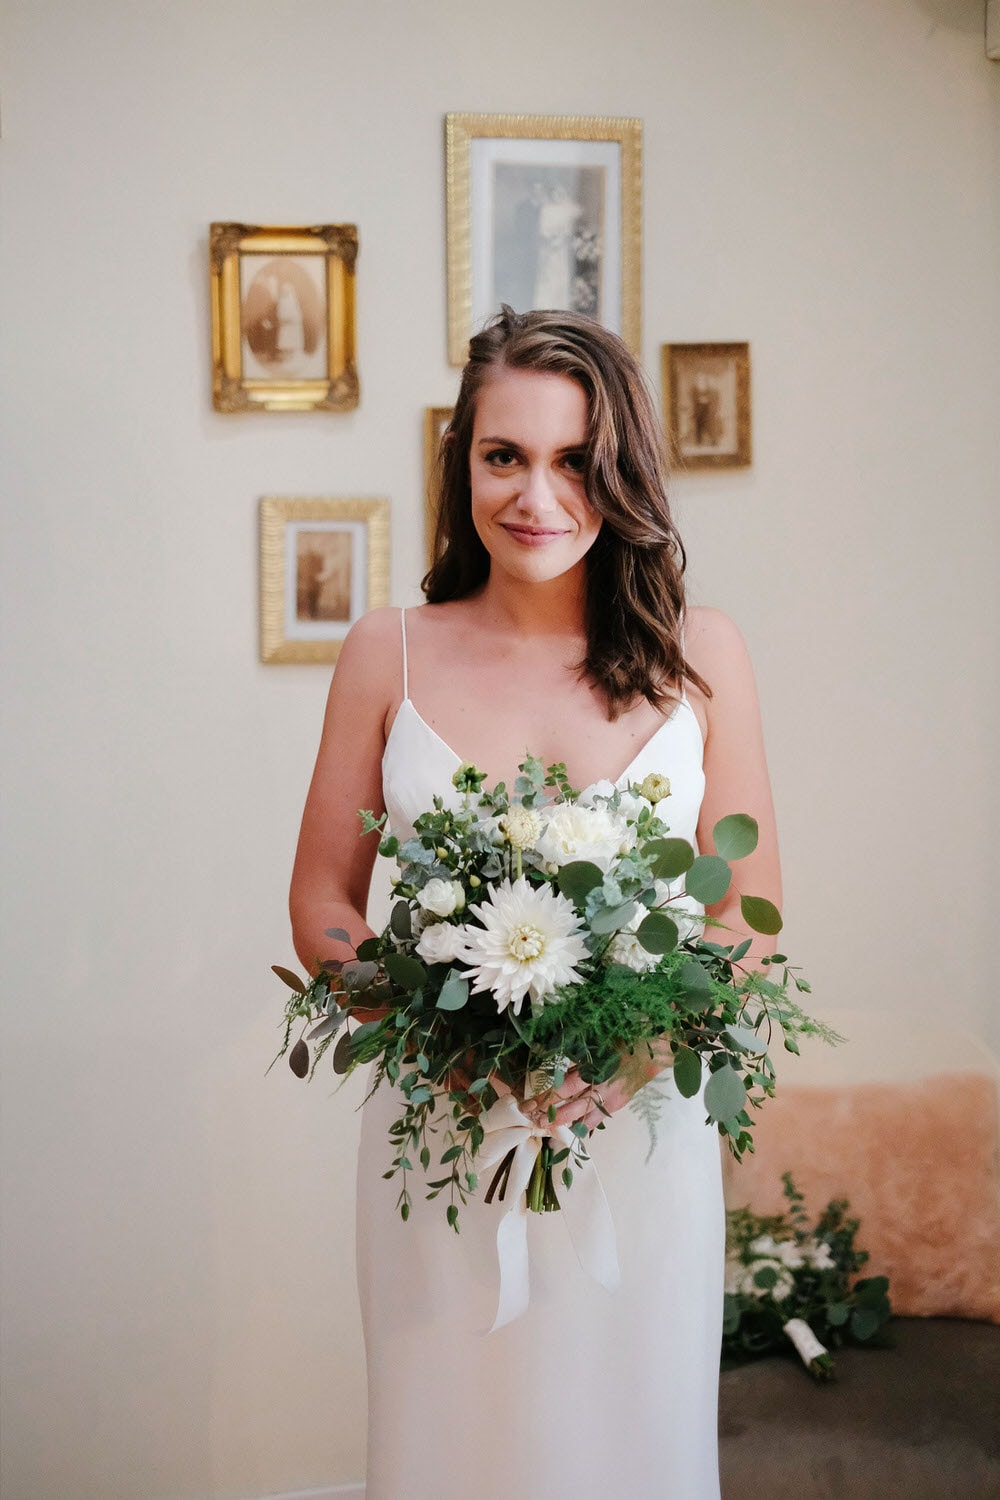 Bride looking straight ahead with a bouquet of white flowers and green leaves